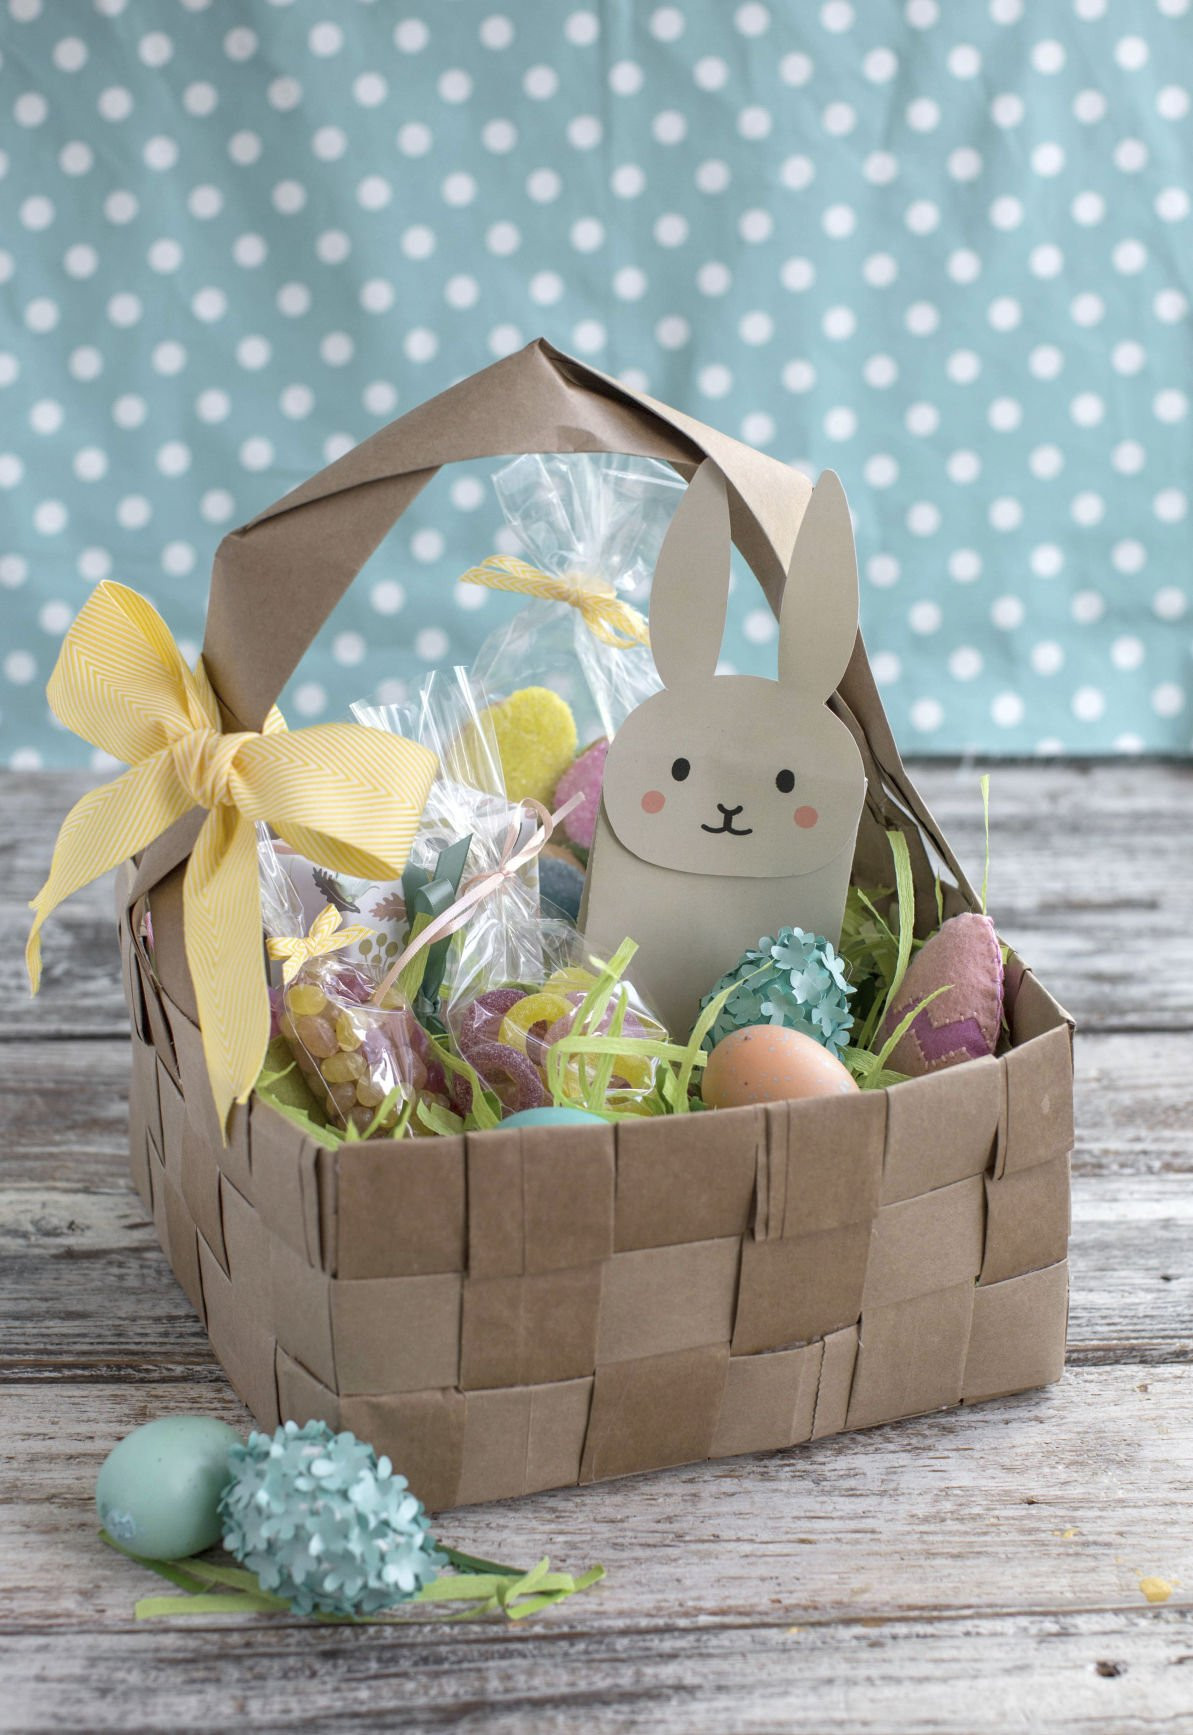 Easter Baskets Diy Unique Hop to It 5 Ways to Creative with Easter Baskets